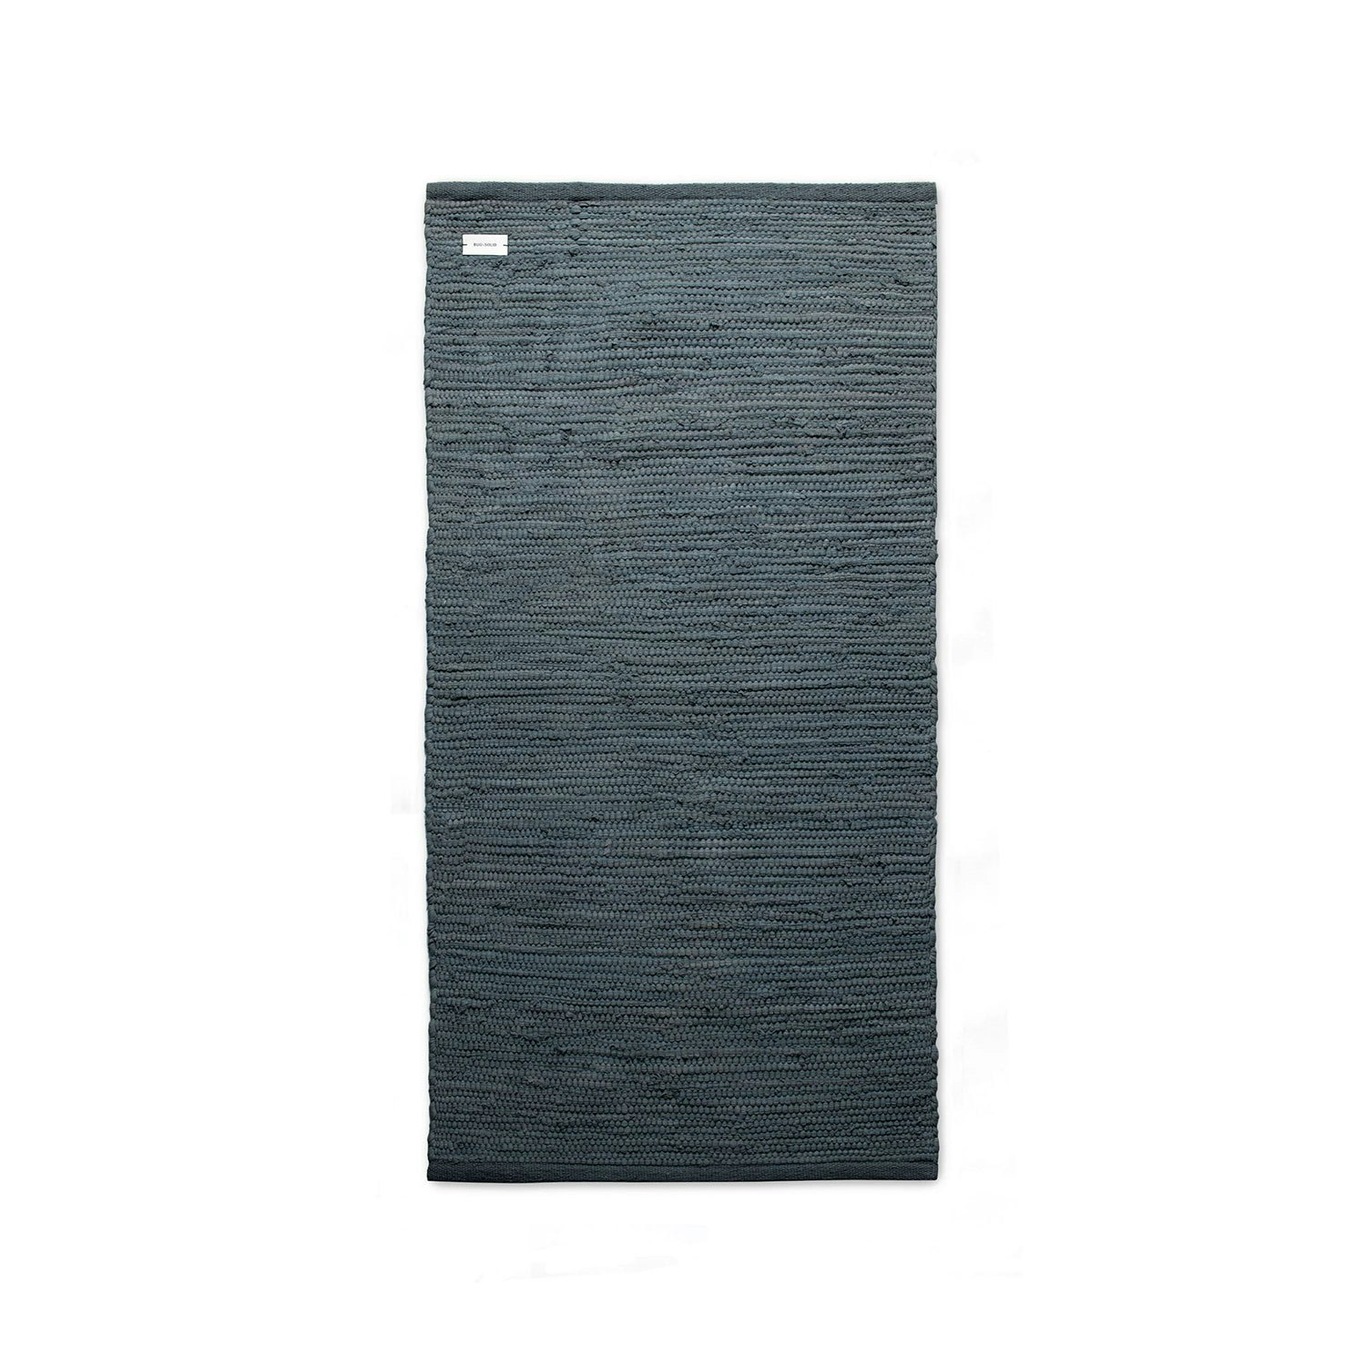 The Ultimate Cotton Rug Graphite Grey